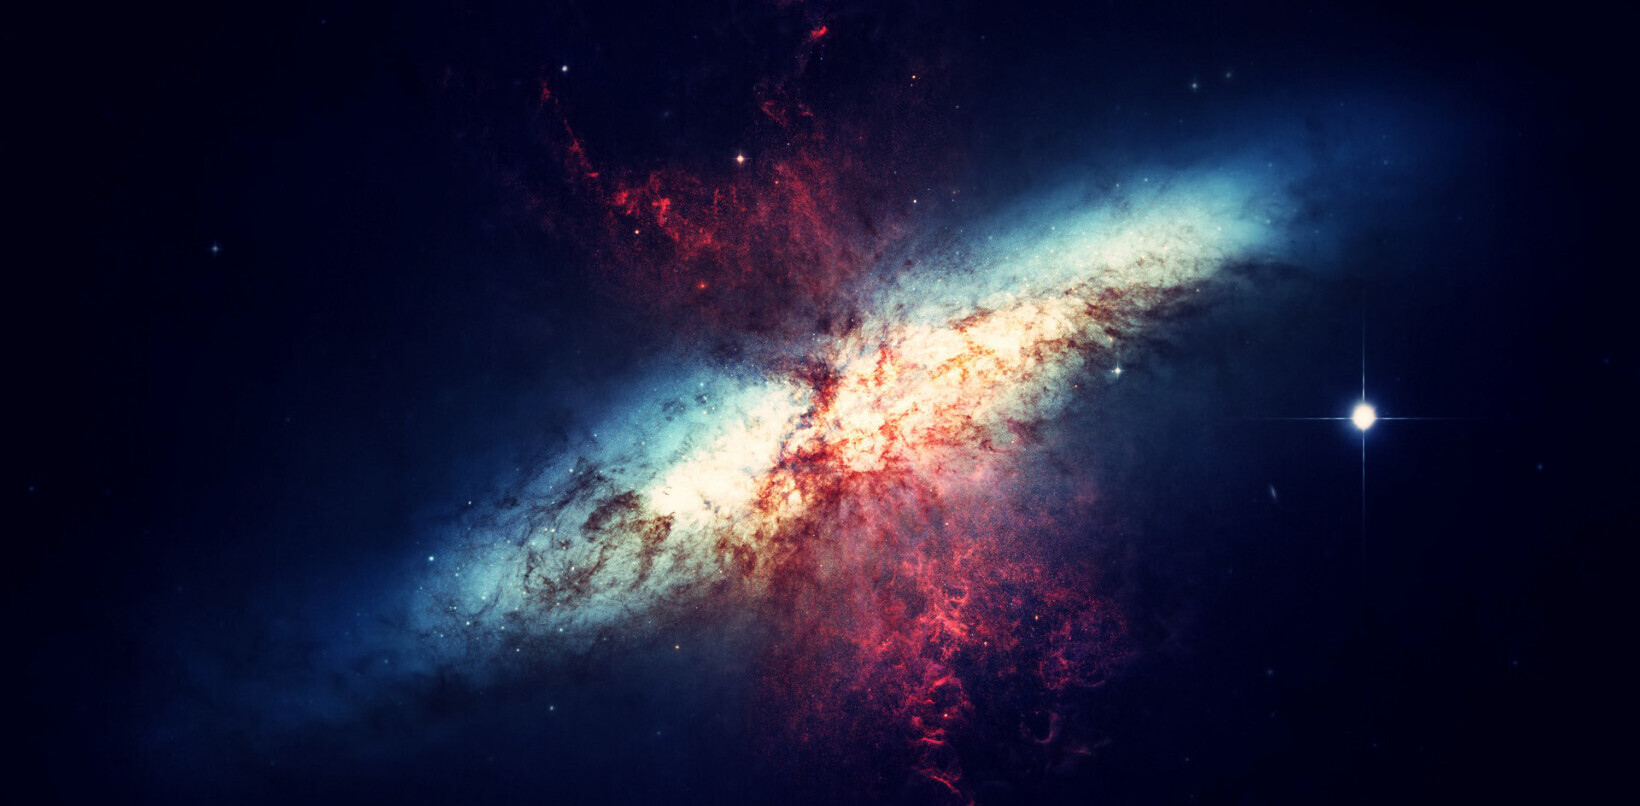 Gas emitted by merging galaxies is stopping stars from forming